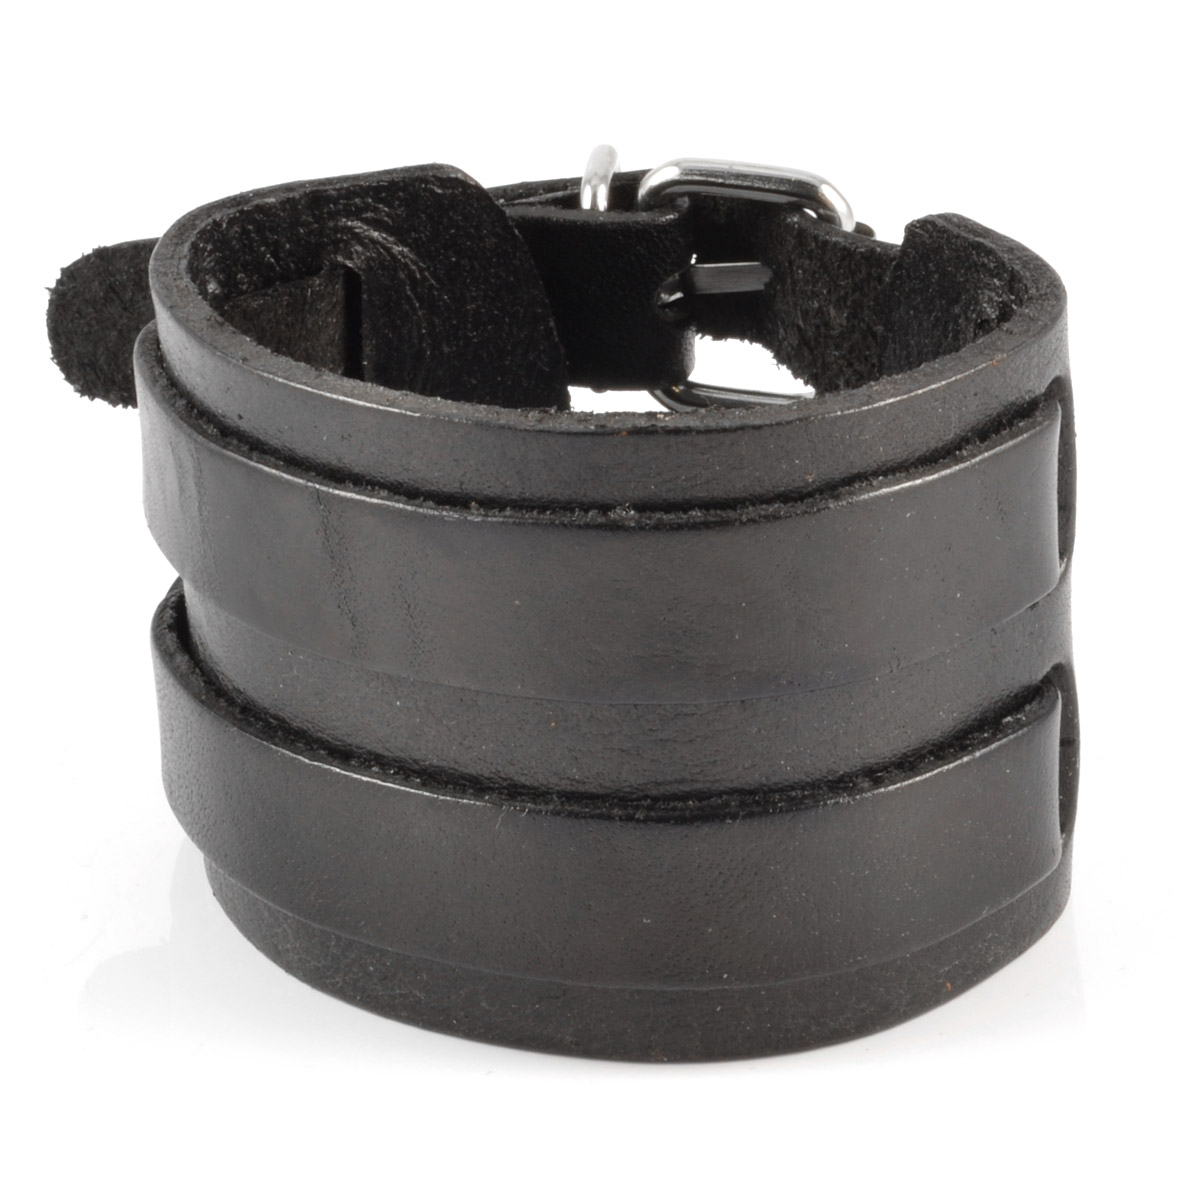 Extra Wide Black Leather Cuff Bracelet - LuckySevenleather